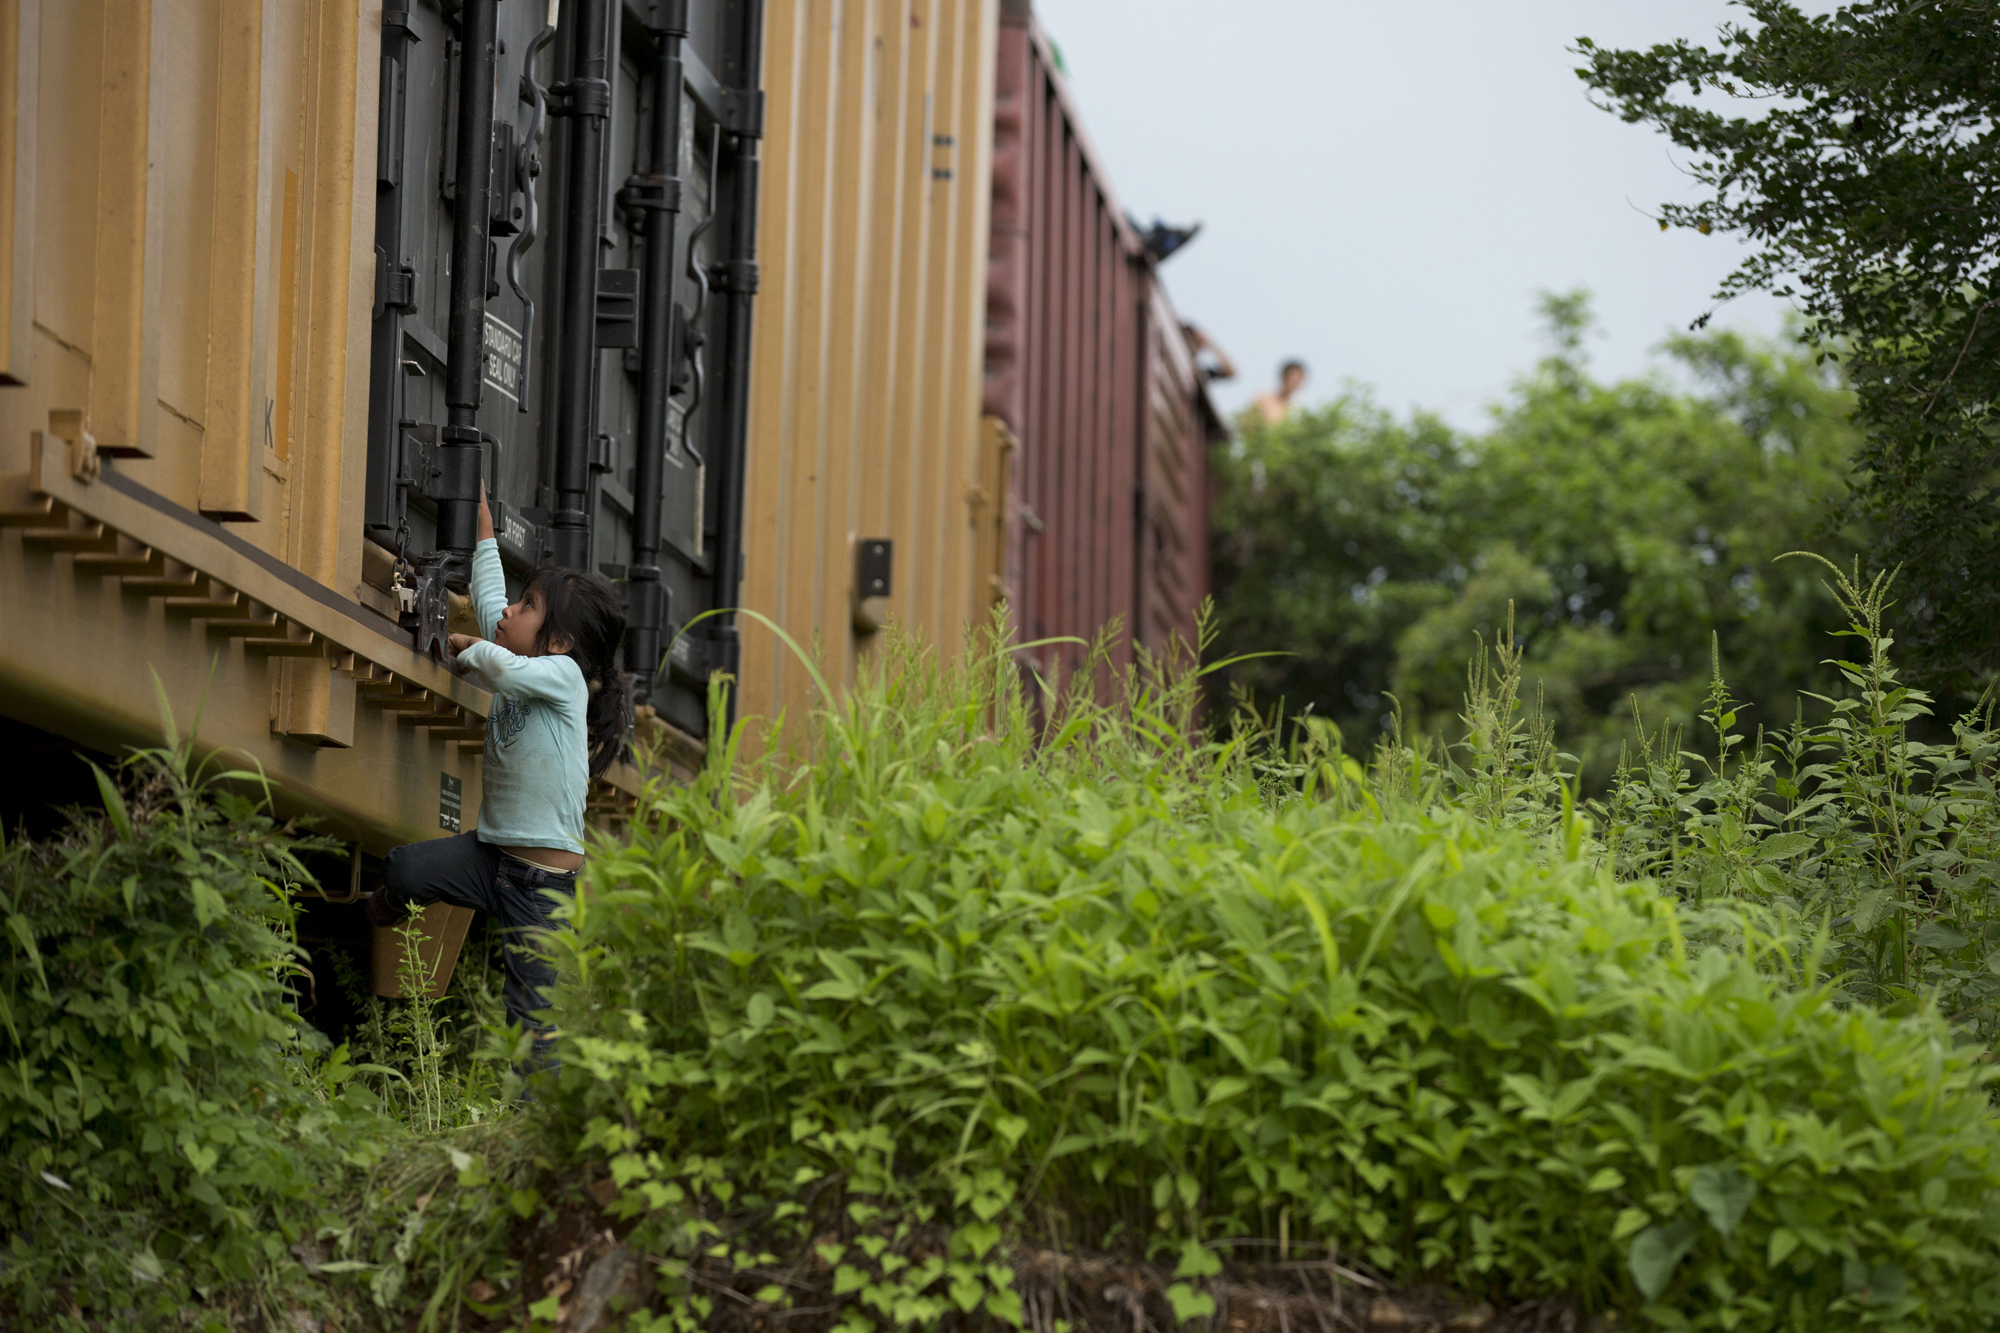 A young girl traveling with Central American migrants plays on the freight train they had been riding, after it suffered a minor derailment in a remote wooded area outside Reforma de Pineda, Chiapas state, Mexico, June 20.